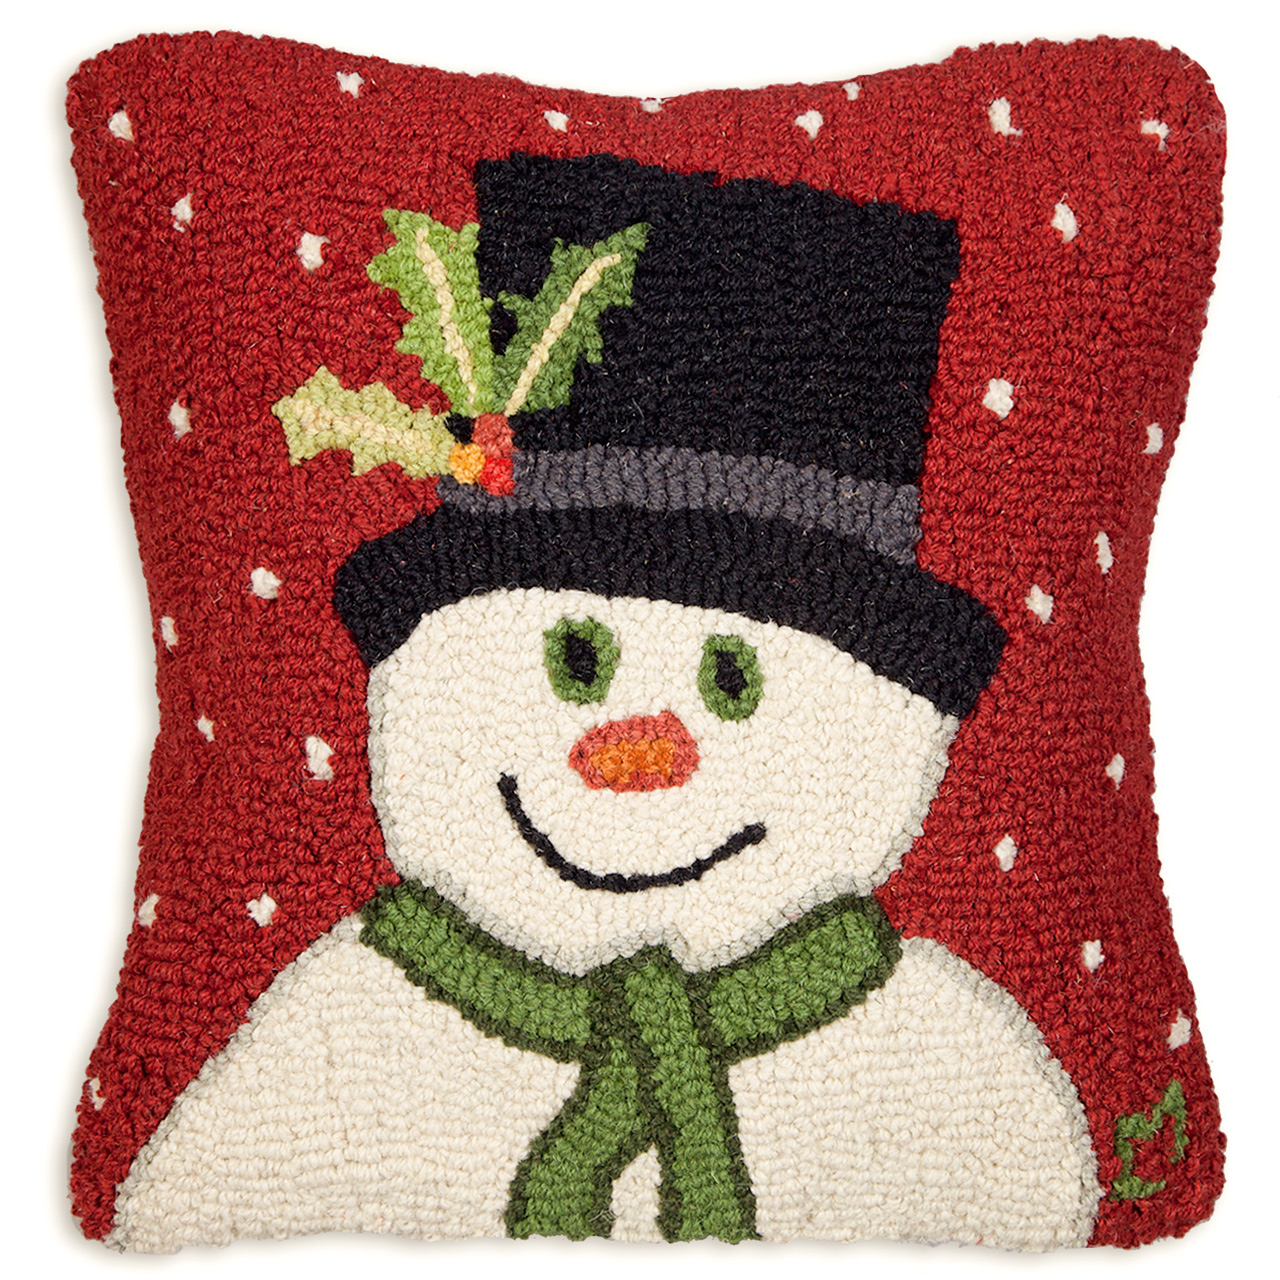 Snowman with Top Hat 18 Hooked Wool Pillow